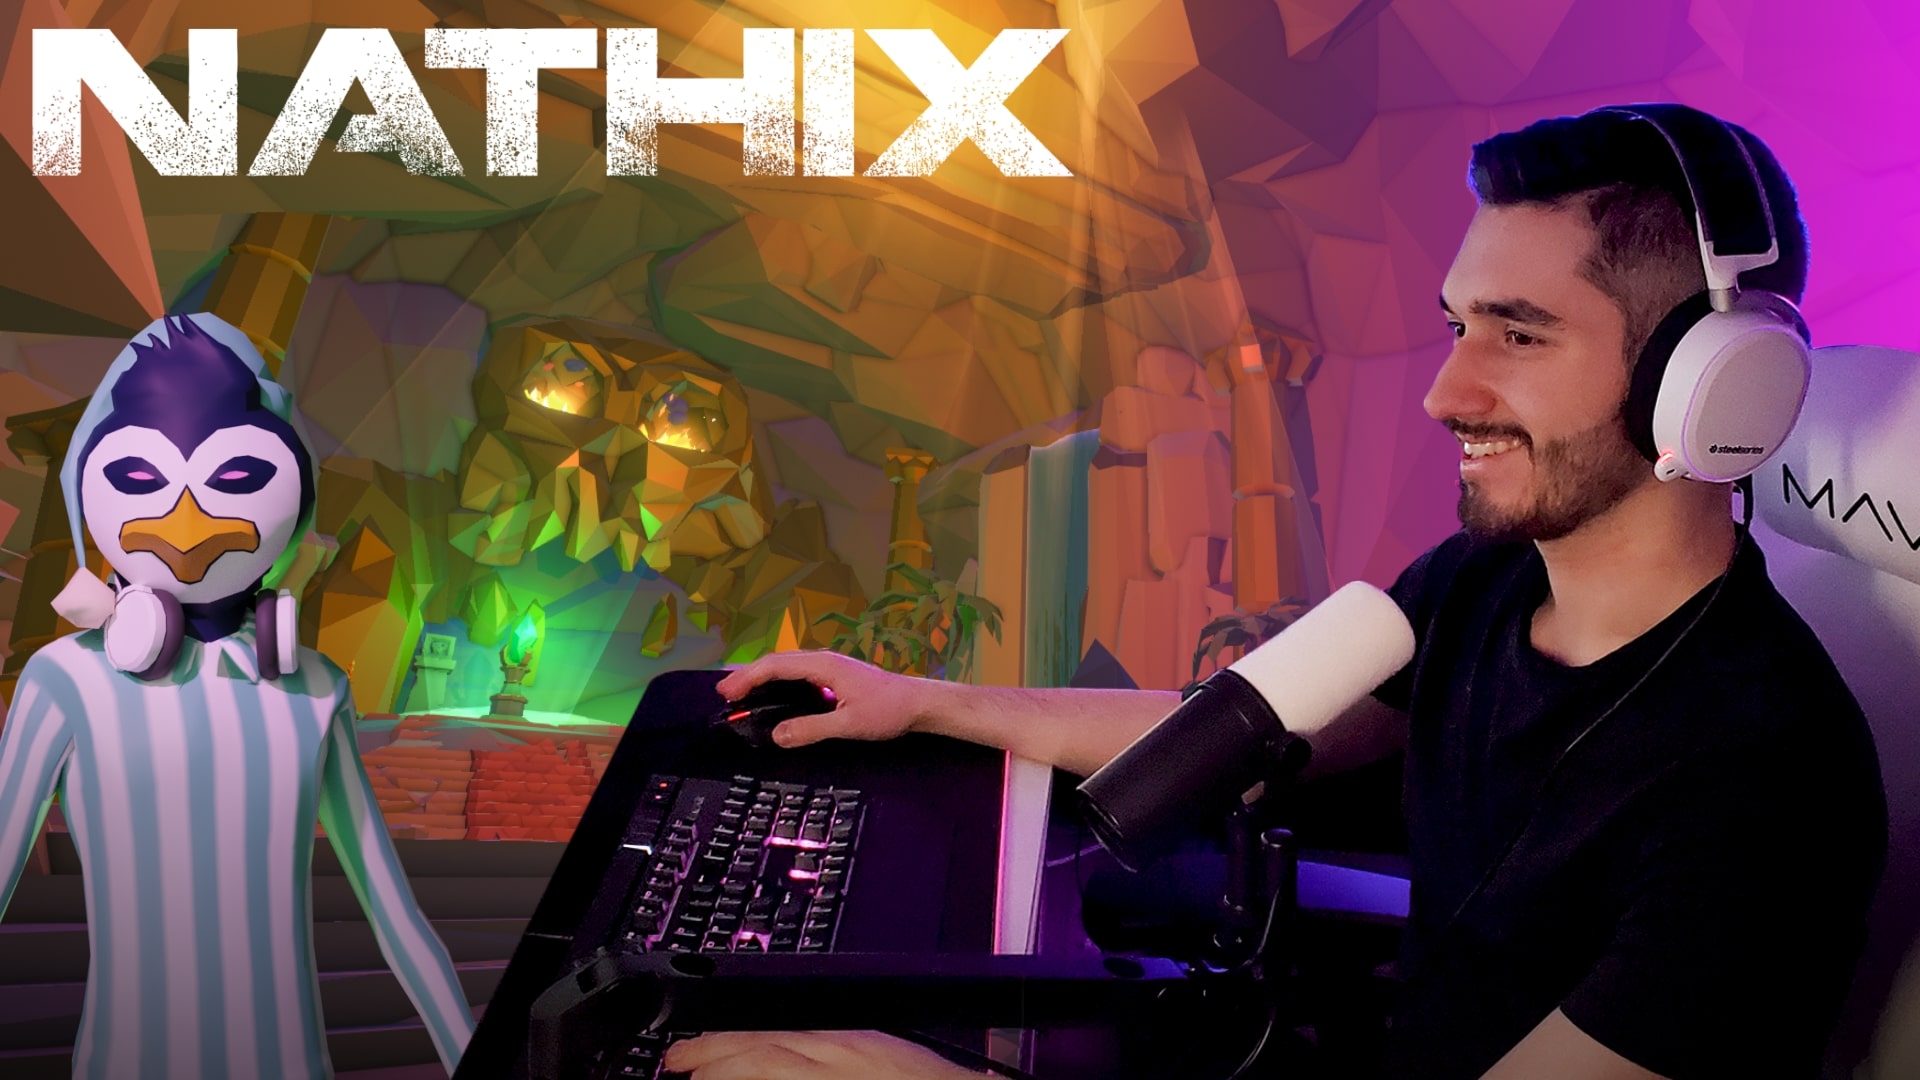 The Nemesis thrills Nathix, the Canadian gamer with an outlook on technology and innovation.